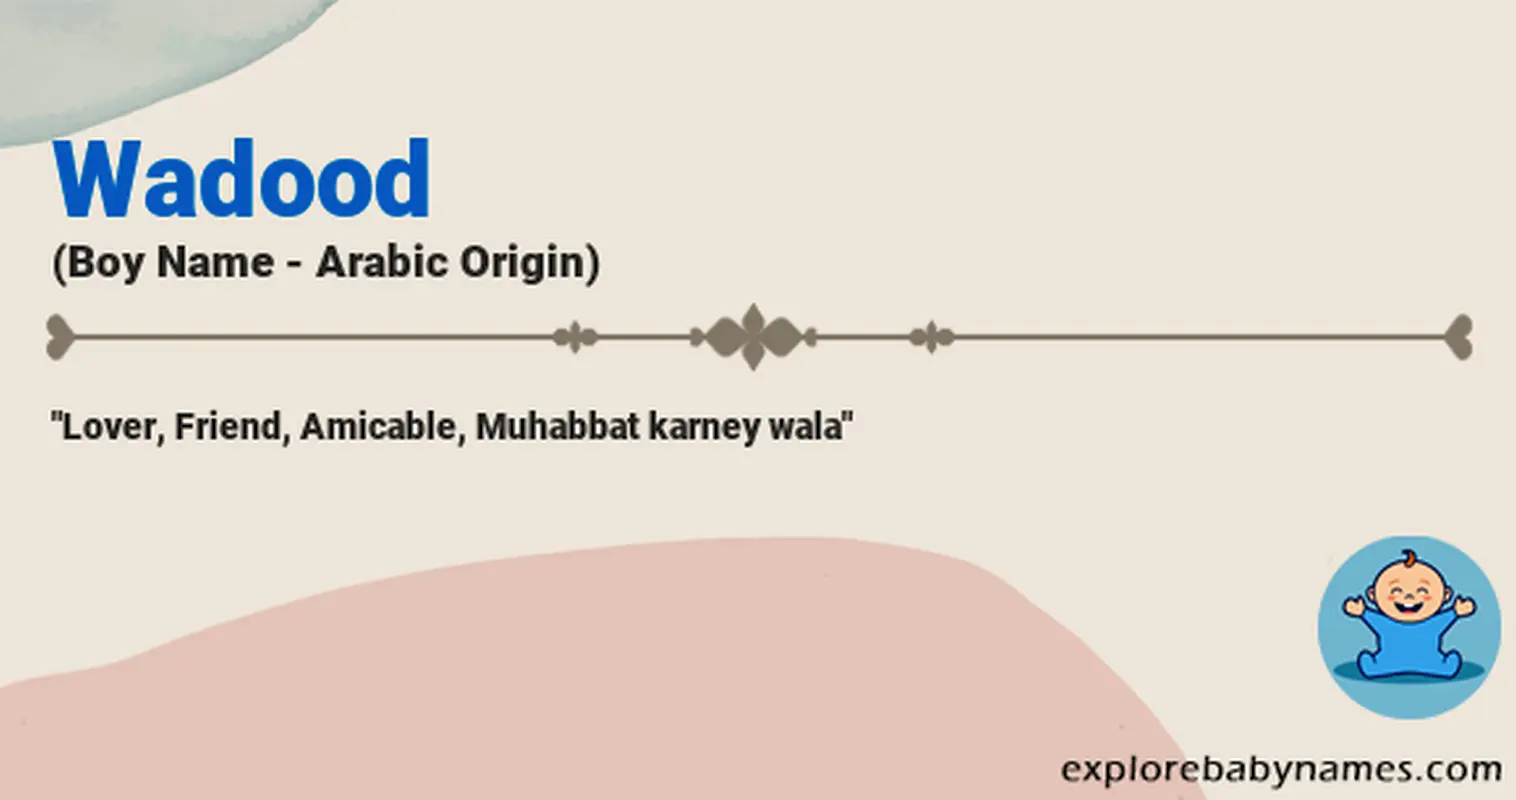 Meaning of Wadood